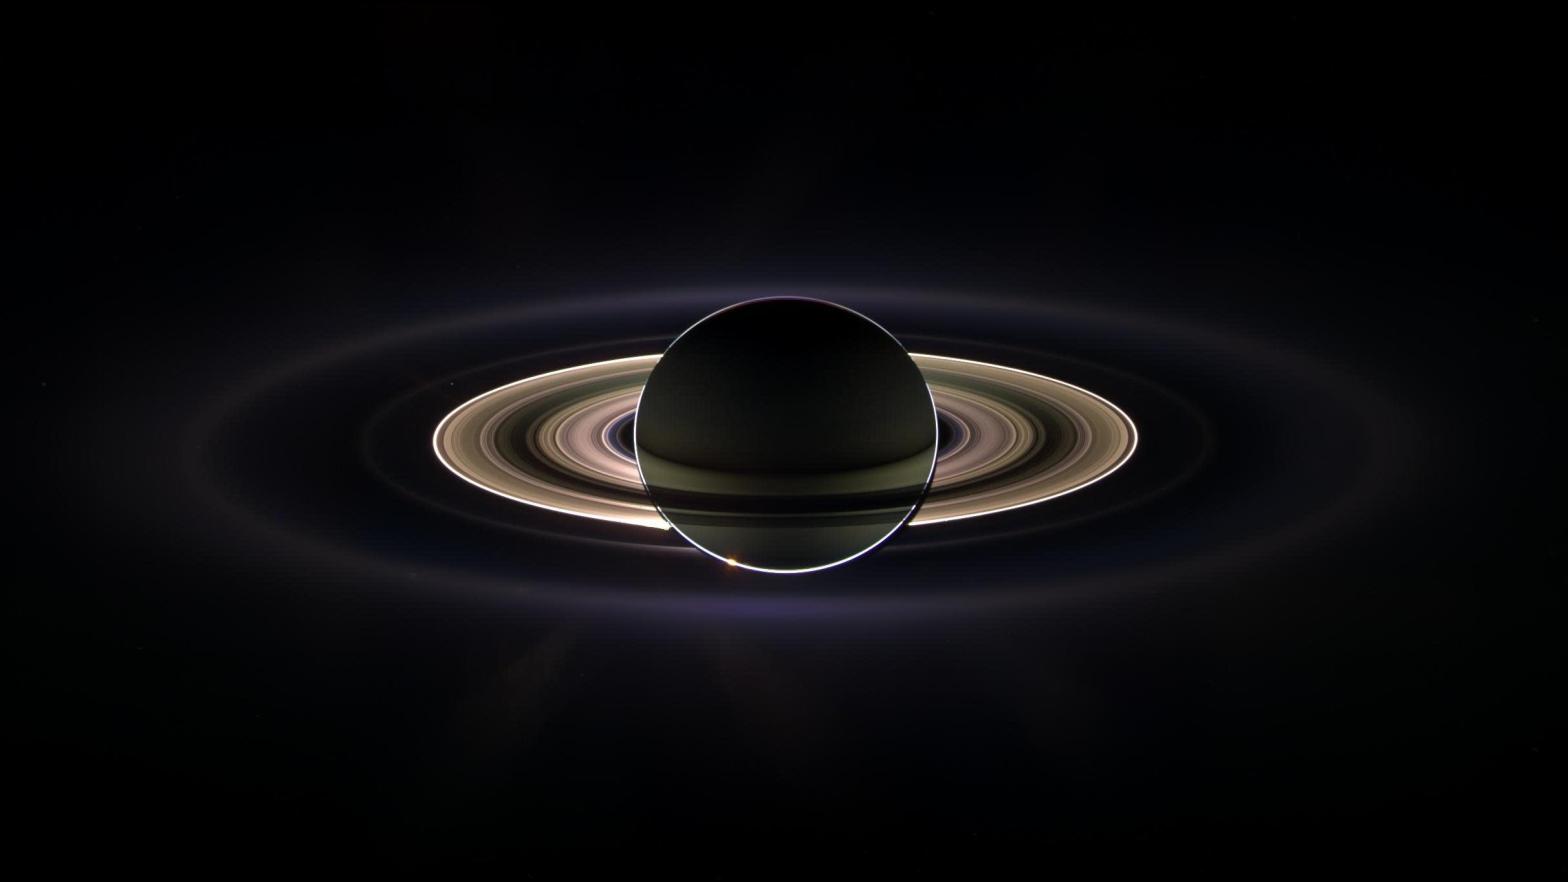 Saturn in 2006, backlit by the Sun. (Image: NASA/JPL/Space Science Institute, Fair Use)